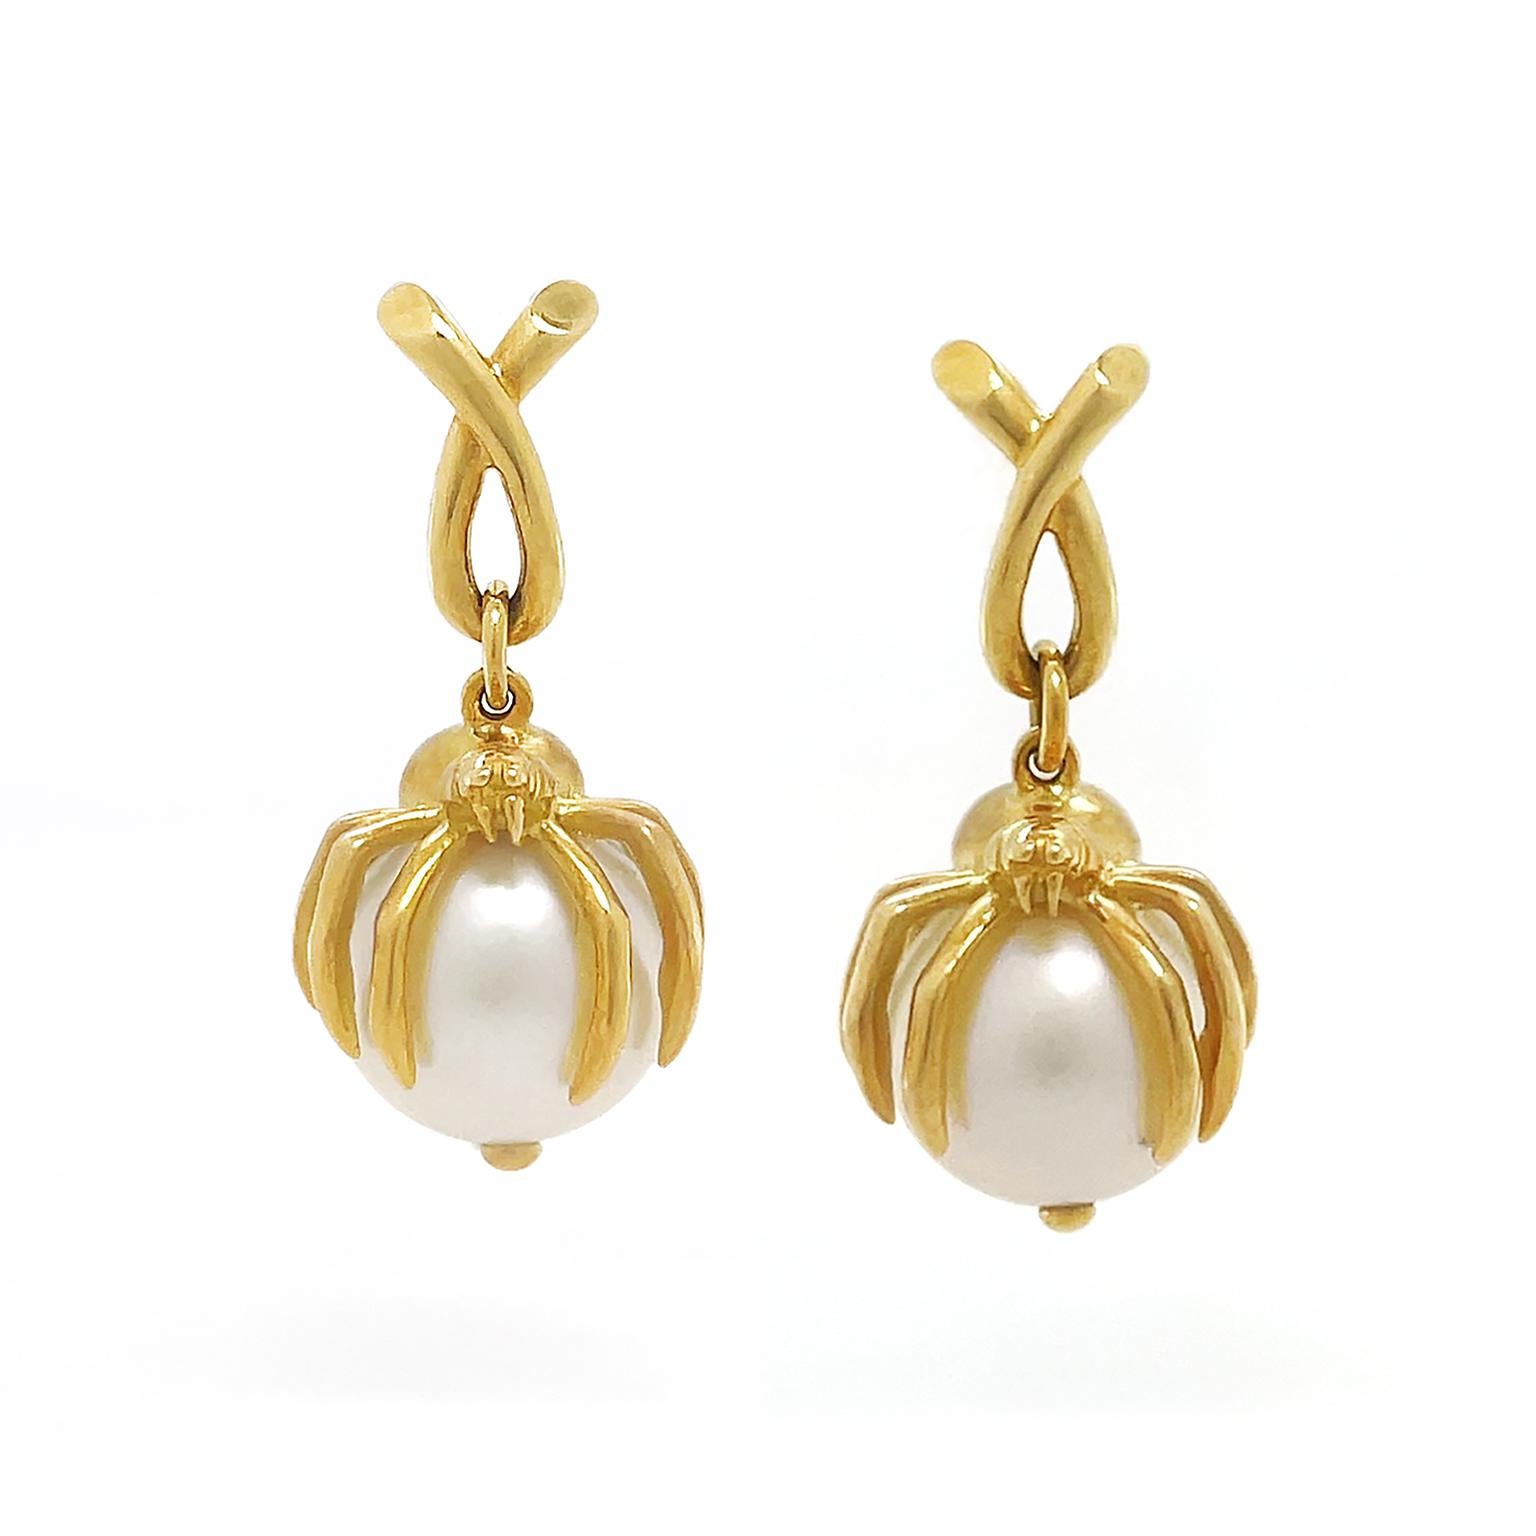 A spider made of lustrous 18k yellow gold brings a unique look to these pearl earrings. Suspending from a gold loop, the spider features detailed work of a head and bent limbs as it cradles a single South Sea pearl. A gold wire within ensures the